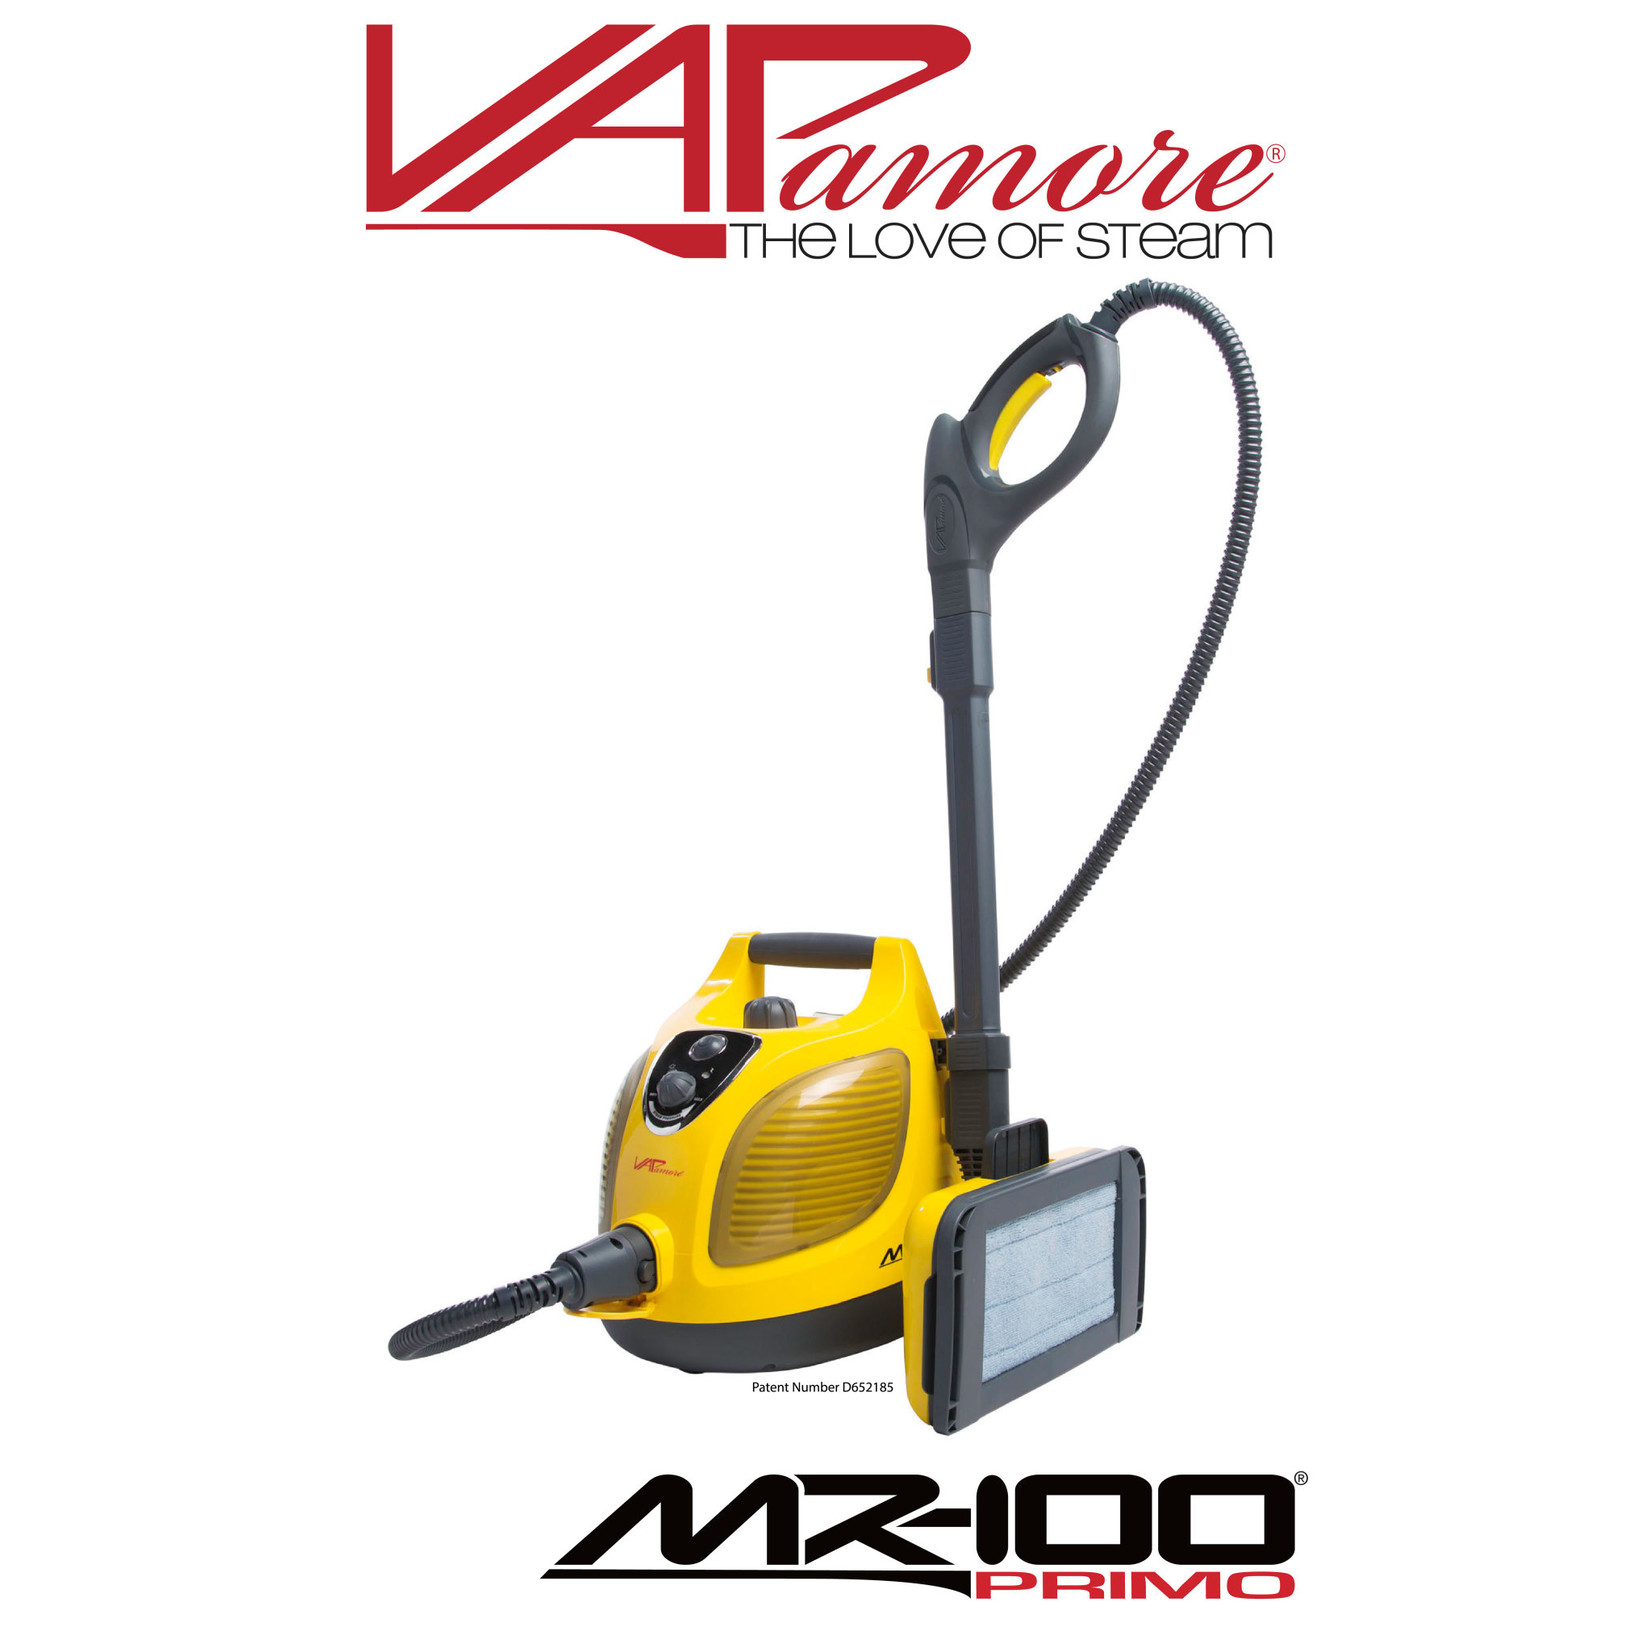 Vapamore Vapamore MR-100 Primo Steam Cleaning System